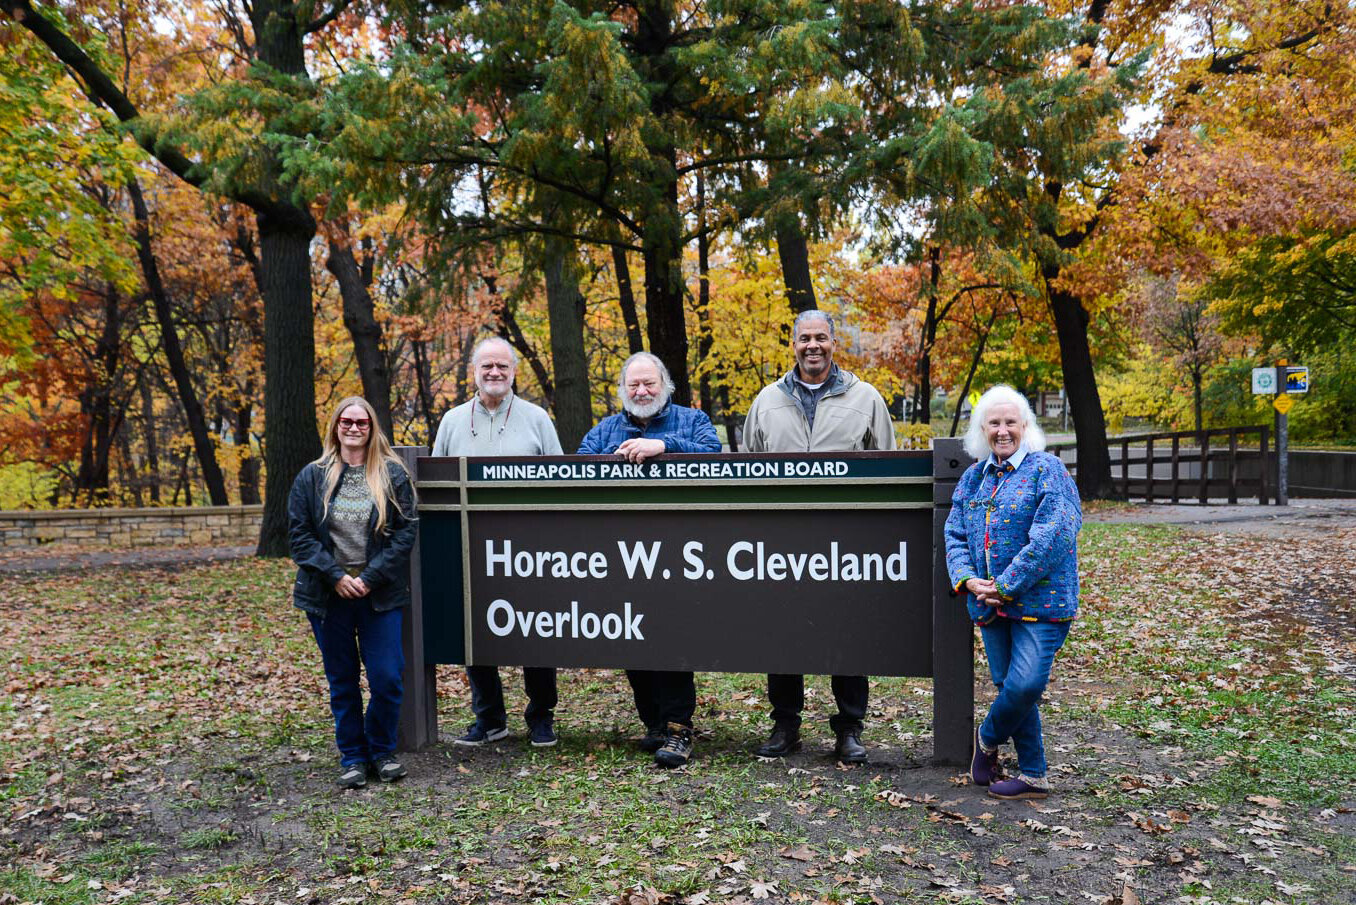 A new sign says "Horace W. Cleveland Overlook"